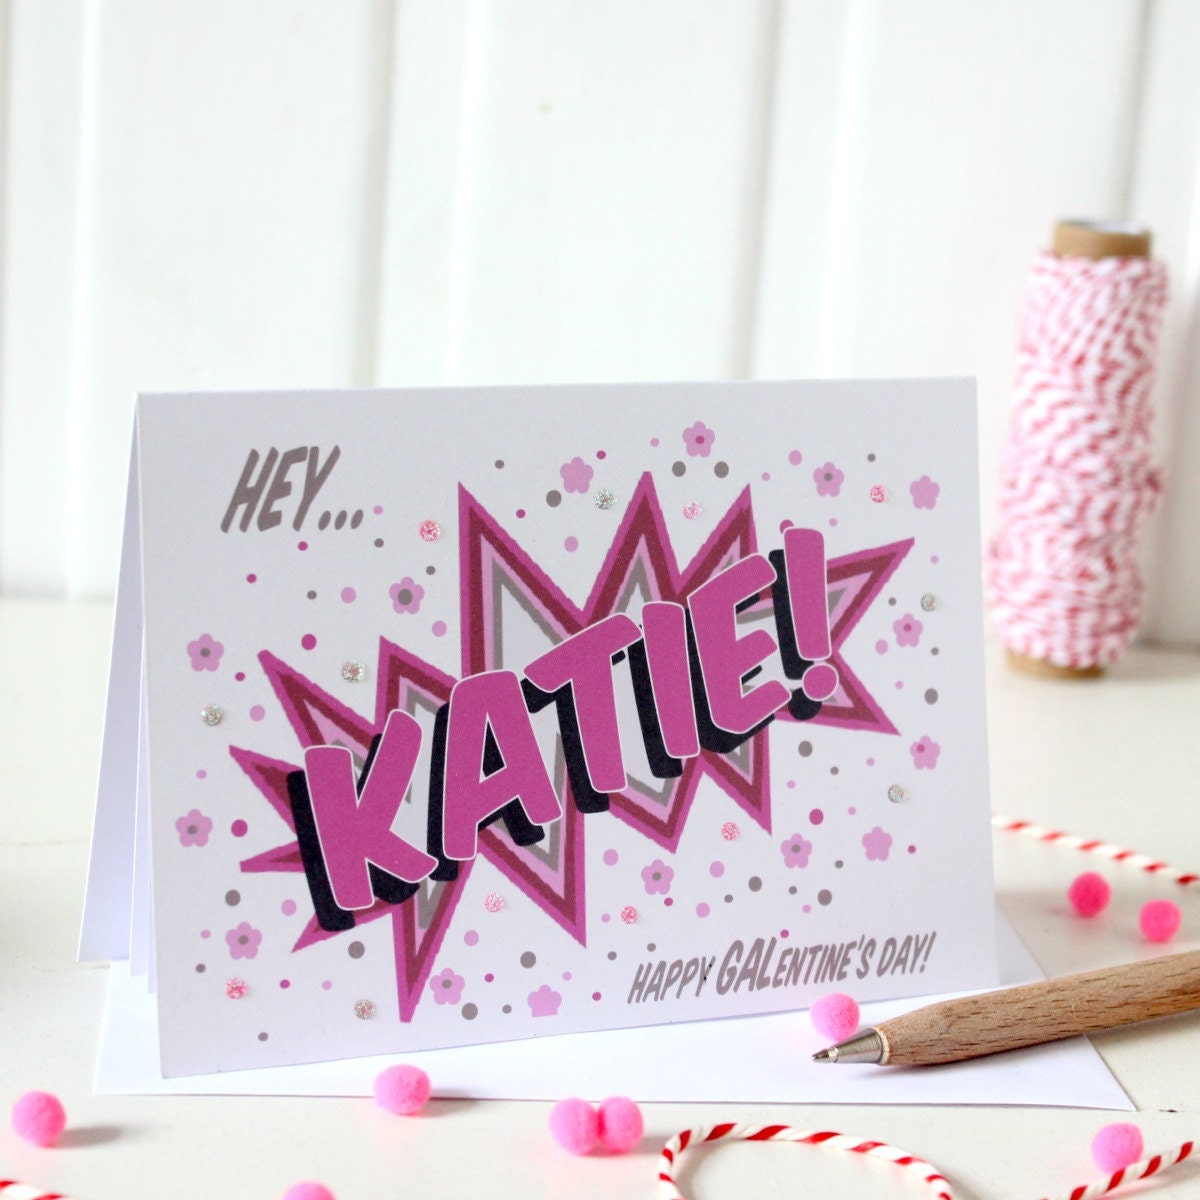 with Sparkly Glitter Details Personalised Pop Art Style Happy Palentine's Day Card